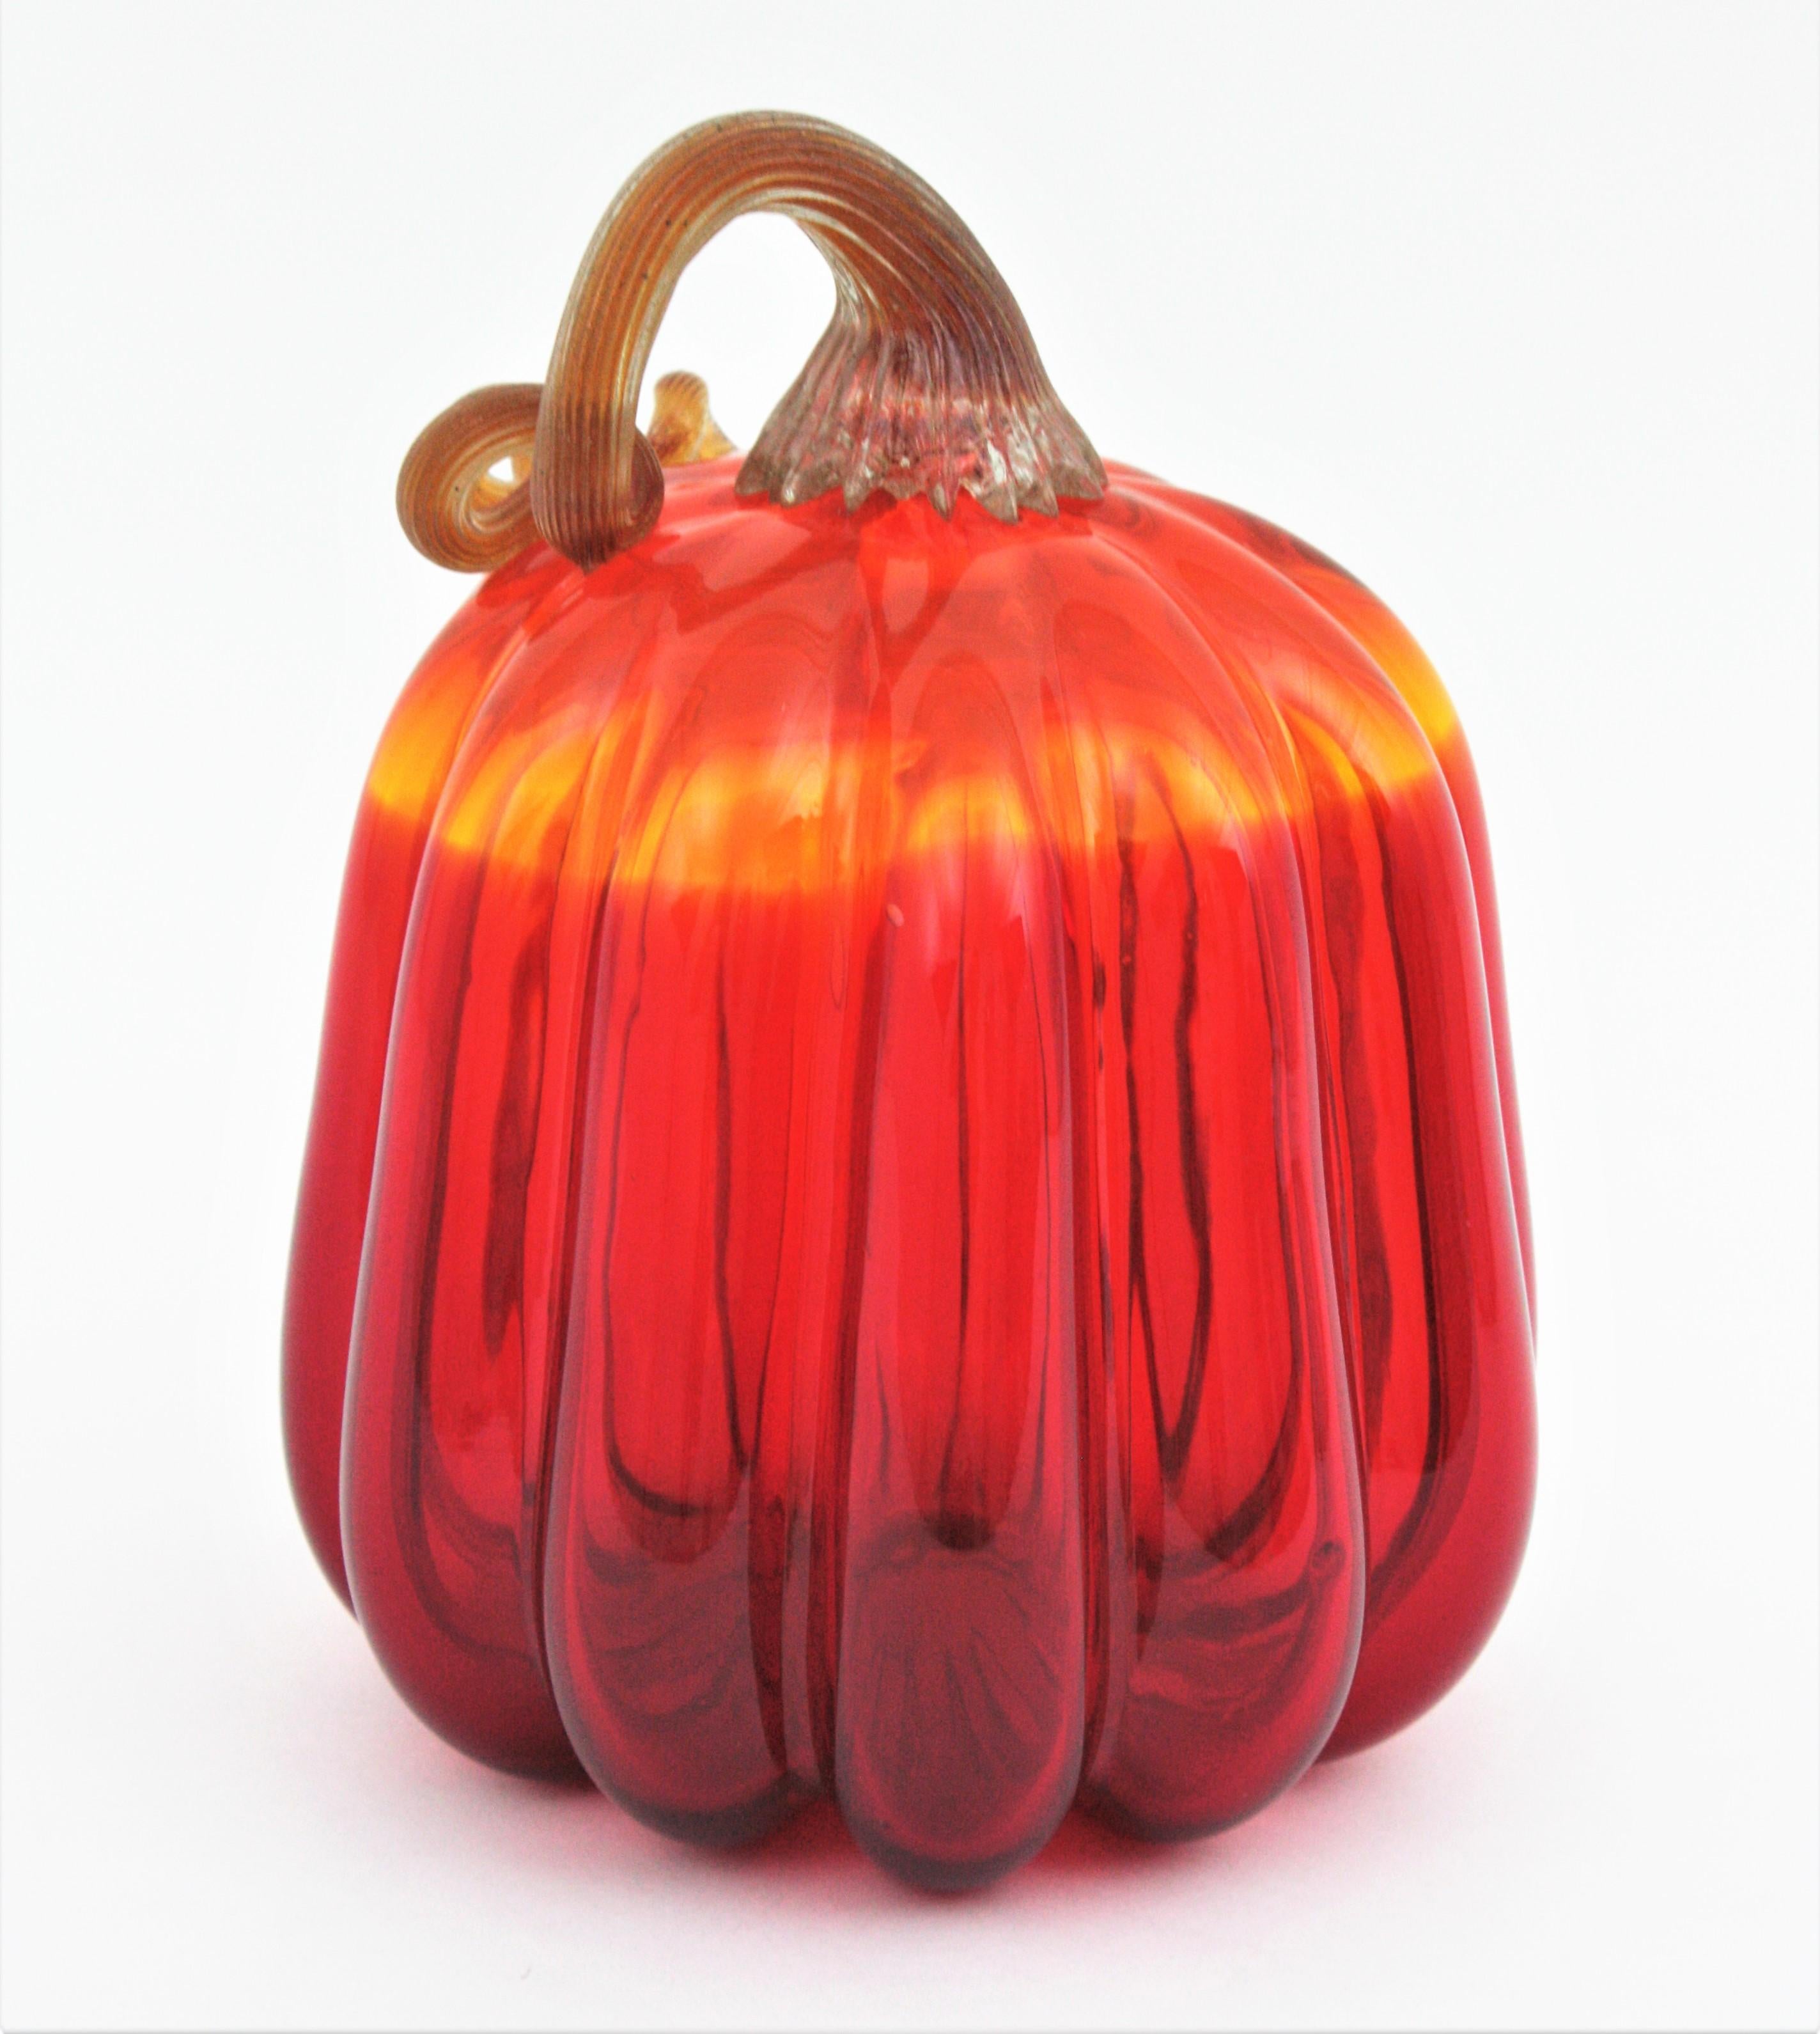 20th Century Italian Murano Art Glass Large Pumpkin Sculpture or Paperweight For Sale